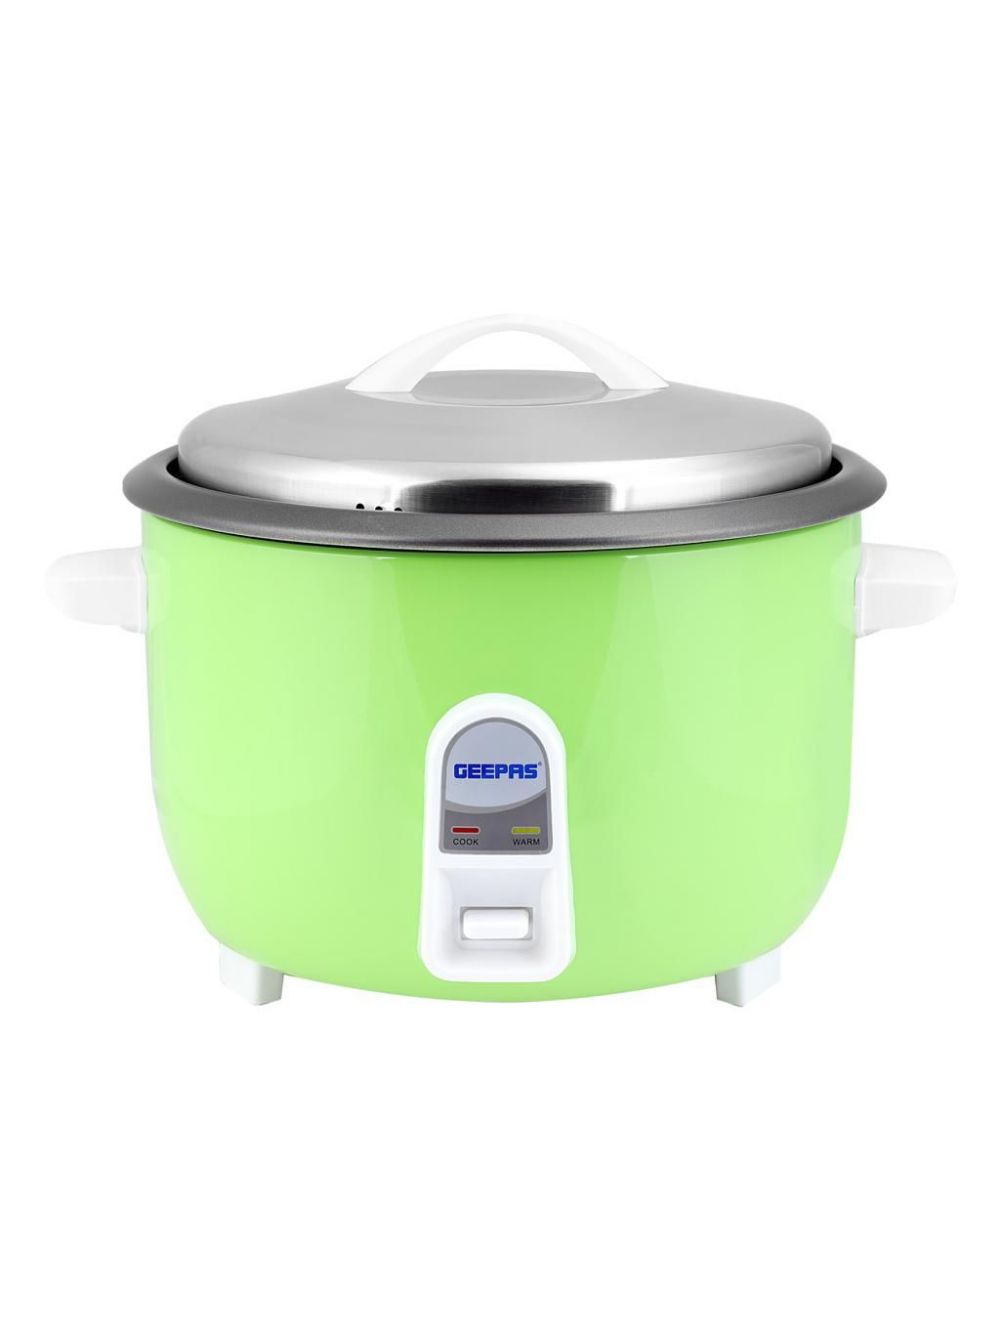 Geepas Electric Rice Cooker 4.2L GRC4321 Green